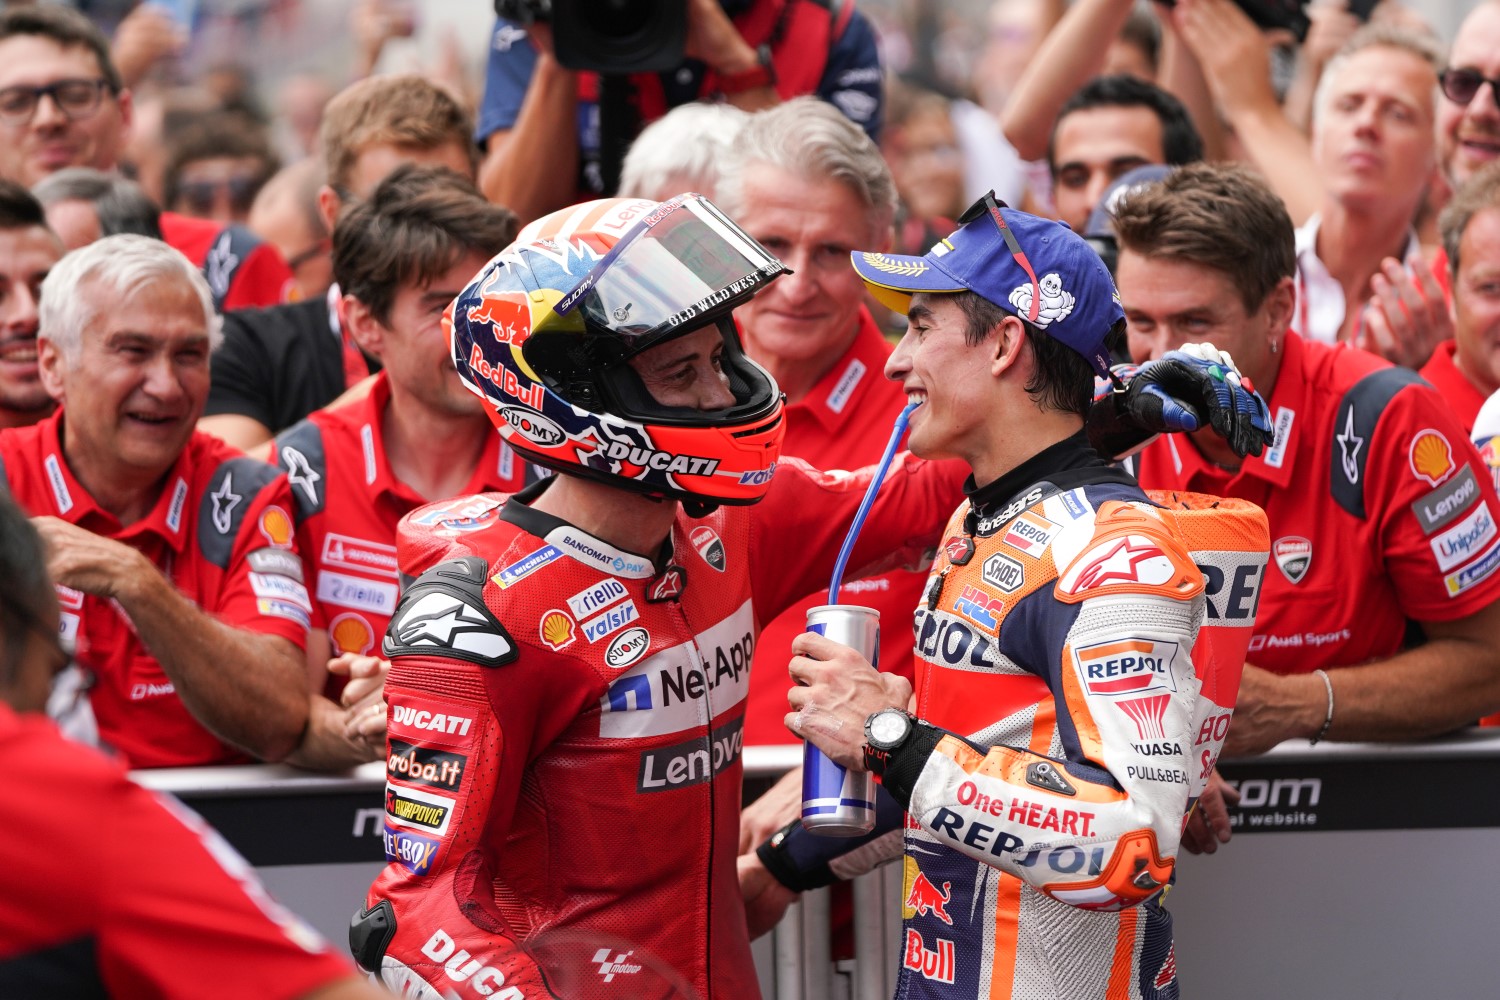 Dovizioso and Marquez congratulate each other on great battle